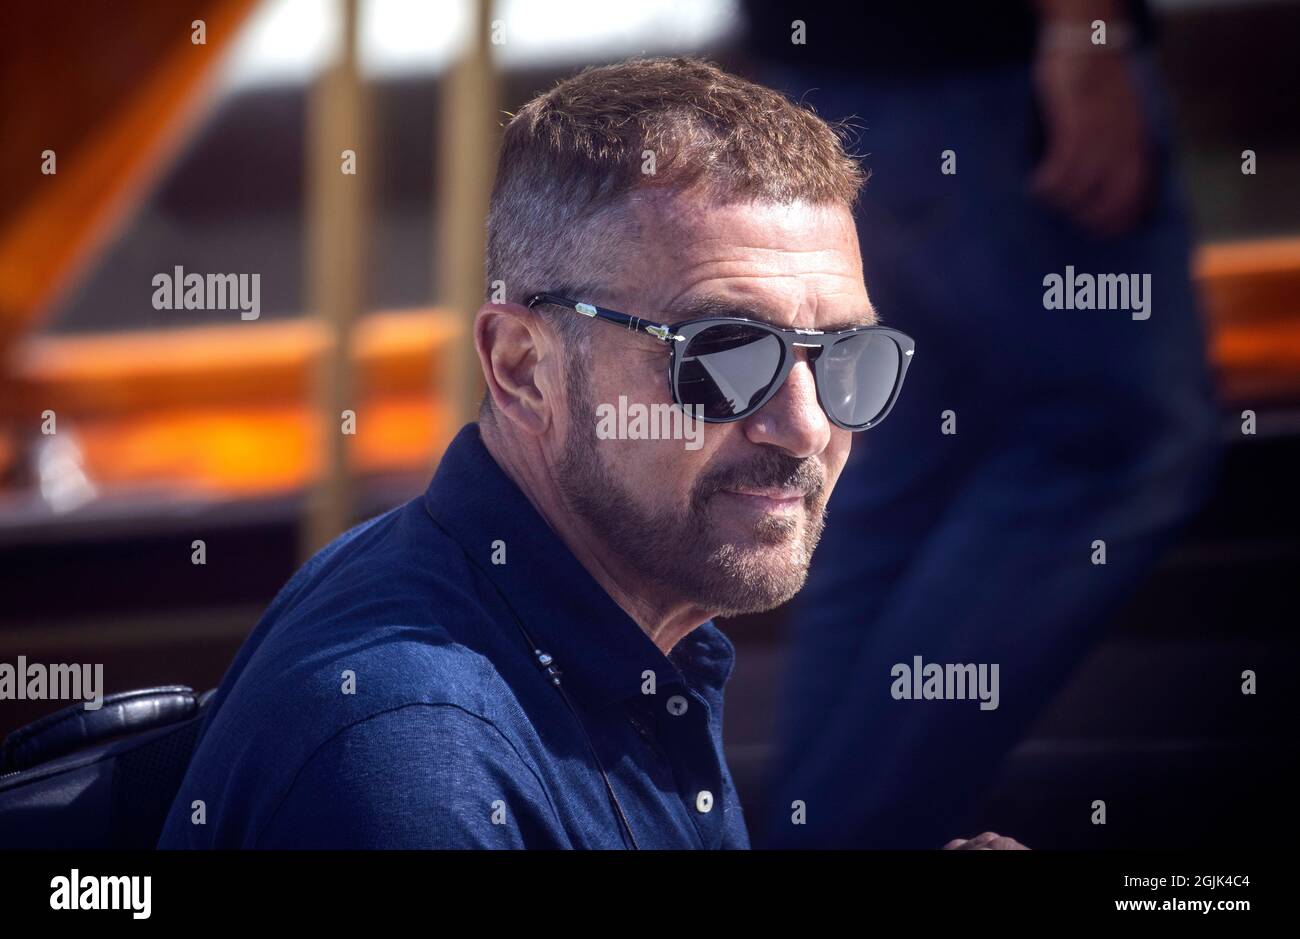 Spanish Actor, director, producer and singer, Antonio Banderas arrives at The Venice Film festival. Stock Photo